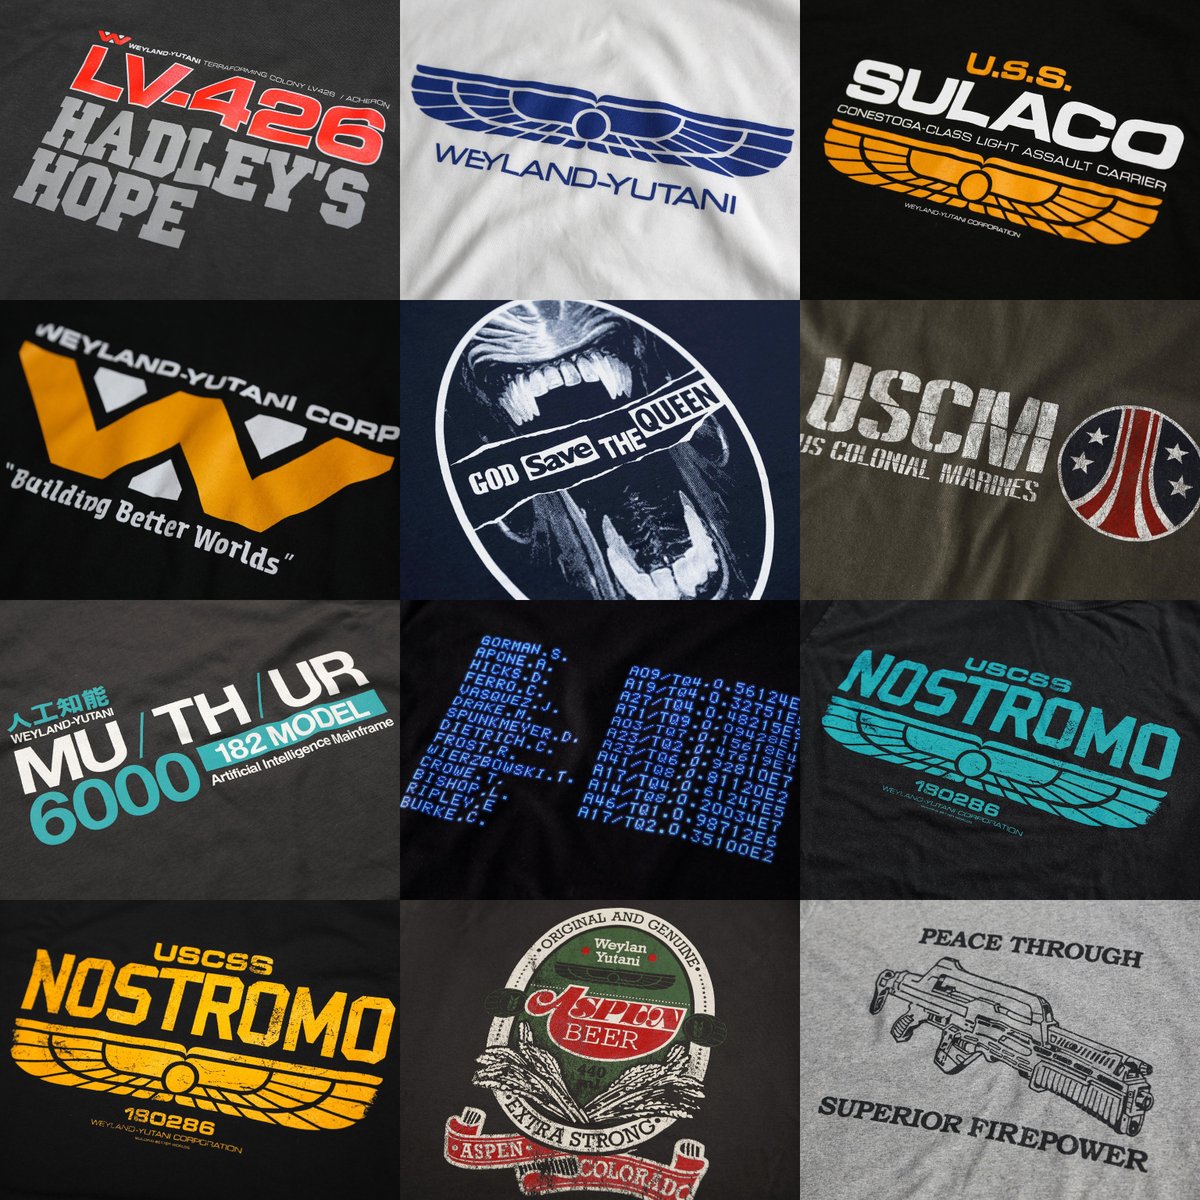 Today, we're offering 20% OFF all these items inspired by the ALIEN franchise > biturl.top/vuEvUn Use the promo code: YUTANI20 during checkout. Offer ends 15.04.24.